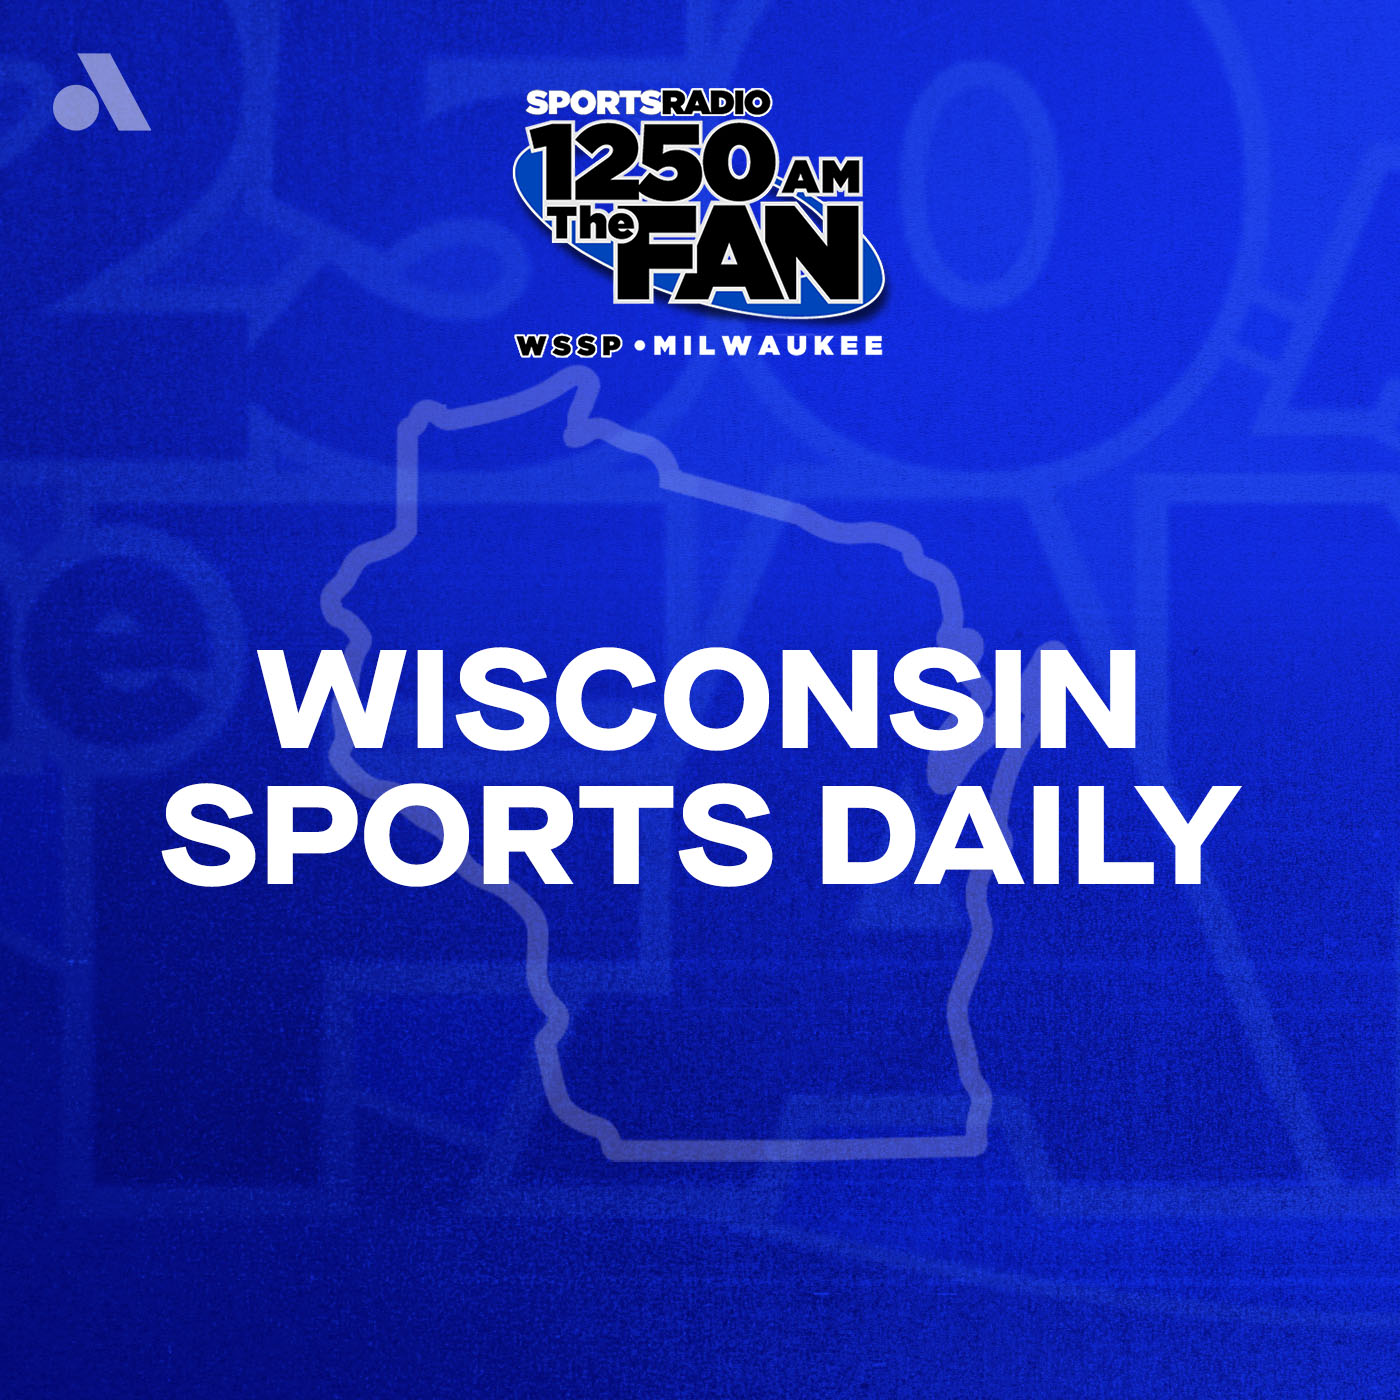 Tuesday, April 23rd: Ross Uglem of the Packer Report Joins Wisconsin Sports Daily